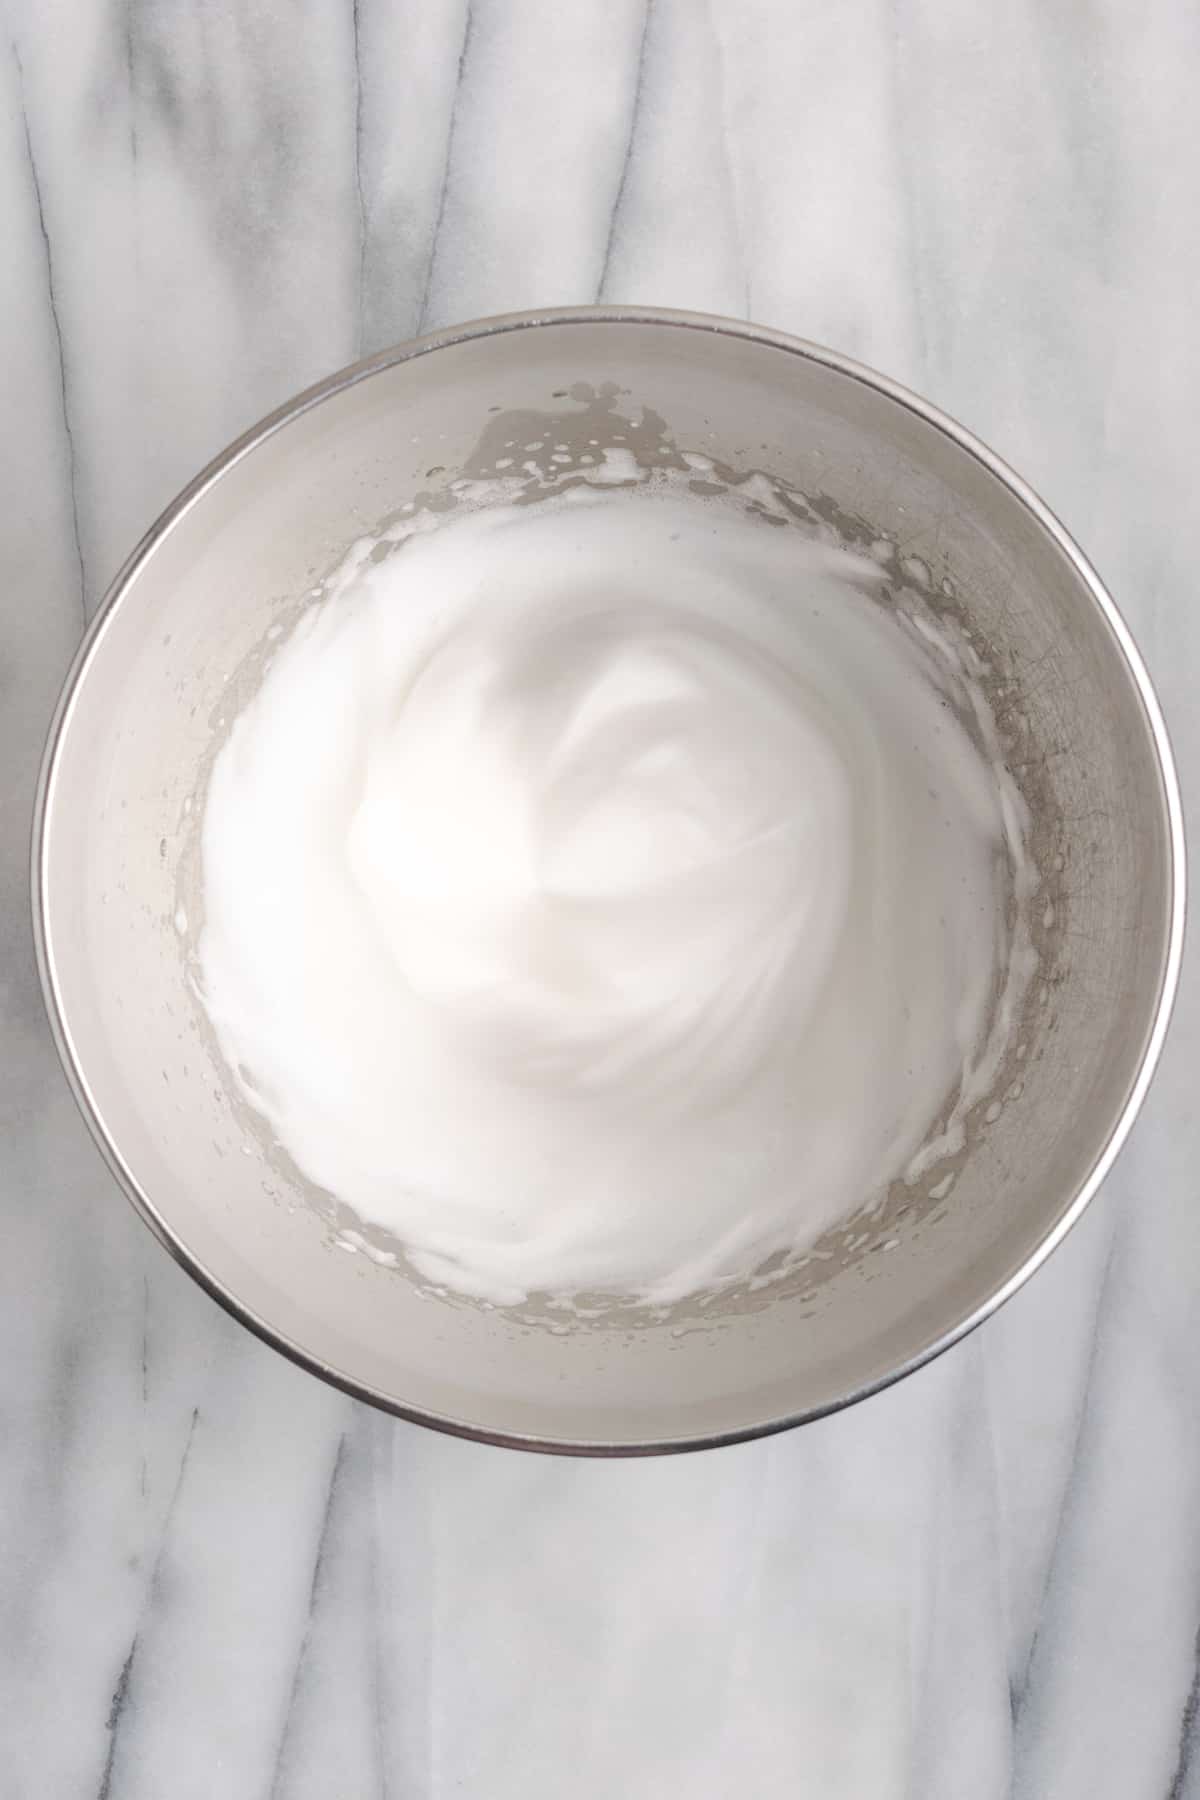 A mixing bowl filled with aquafaba whipped to stiff peaks.